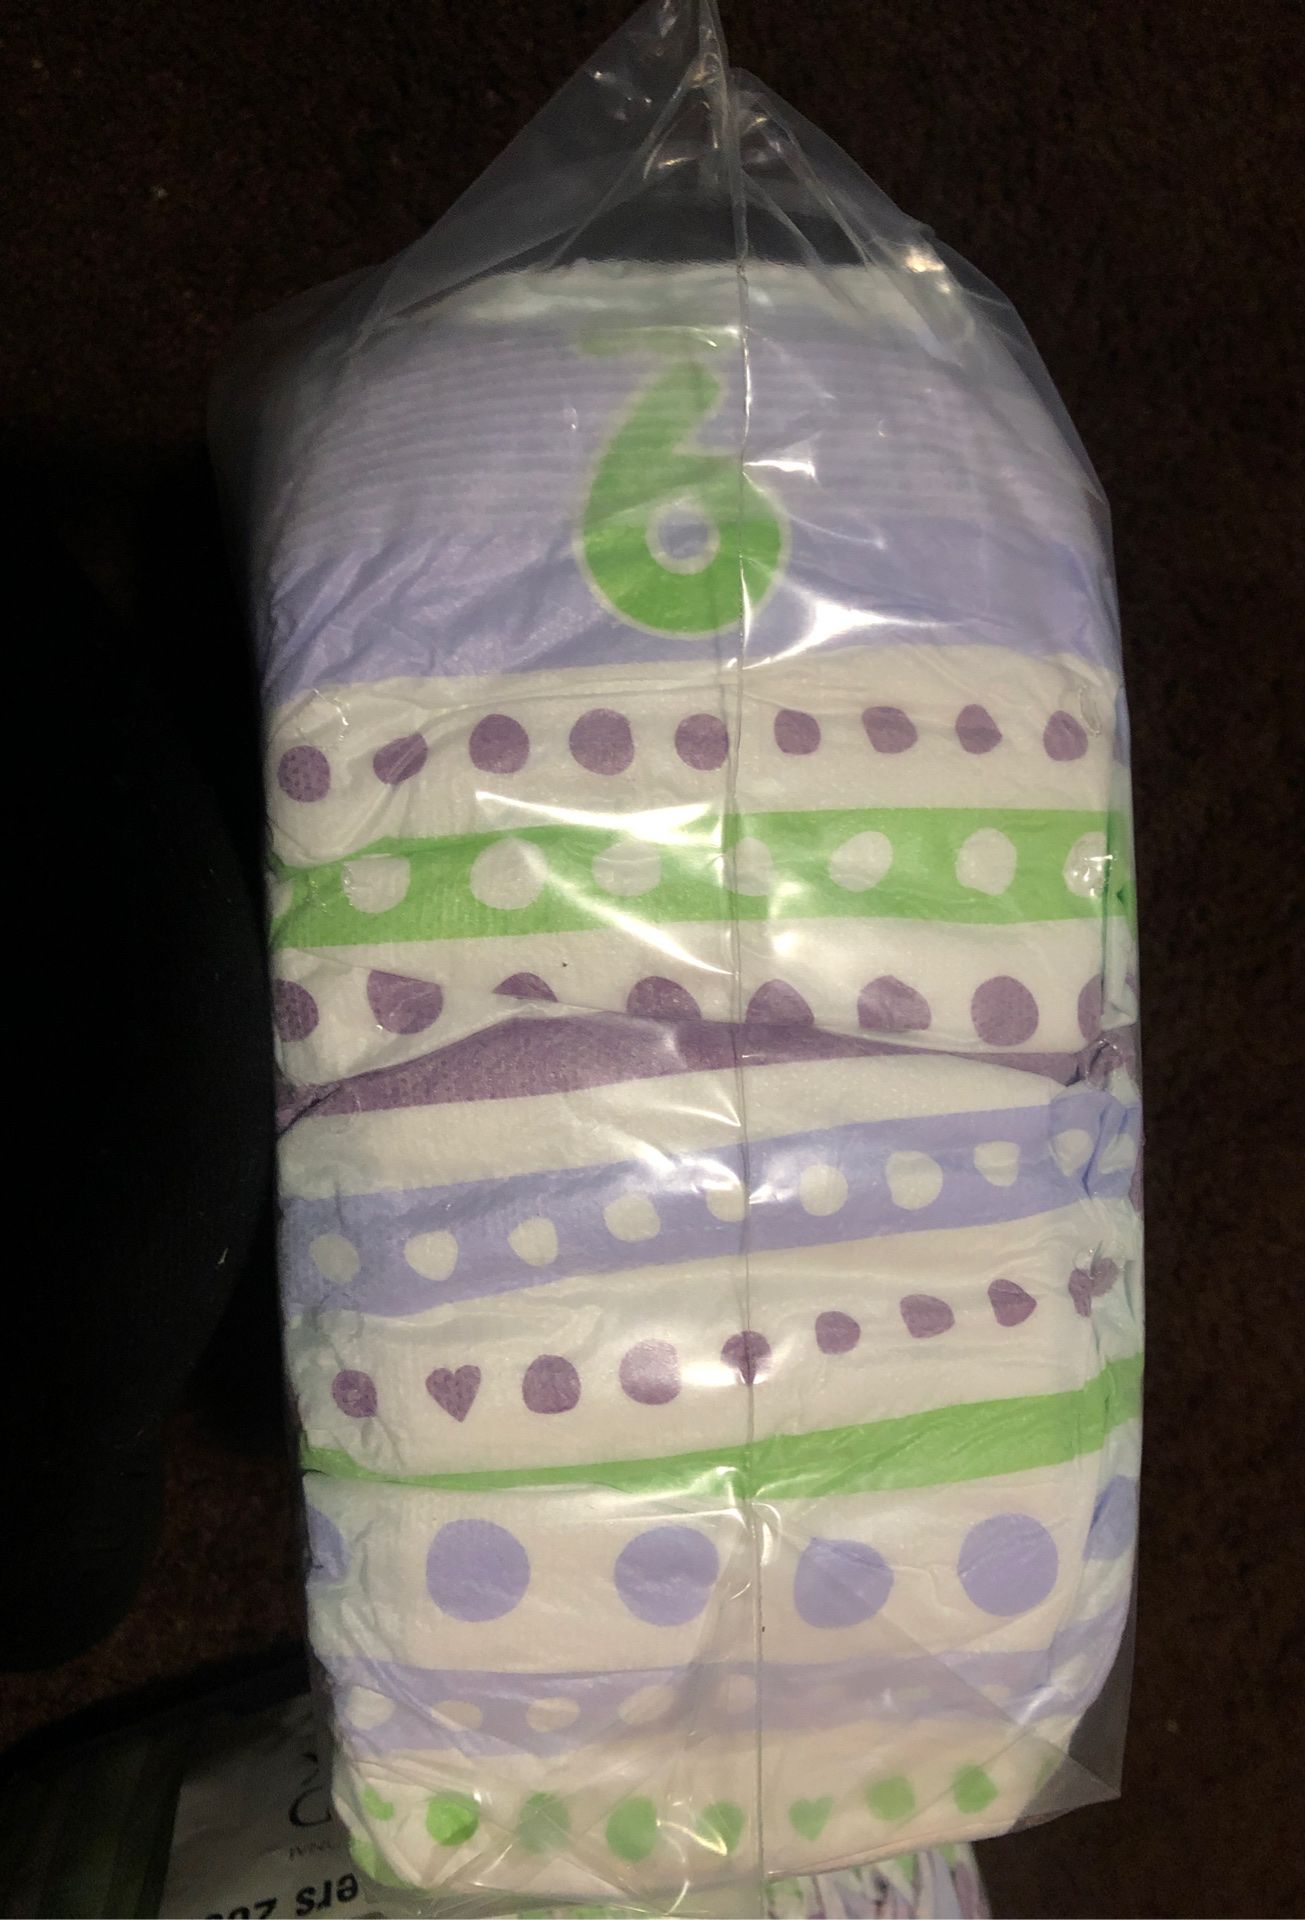 Diapers size 6